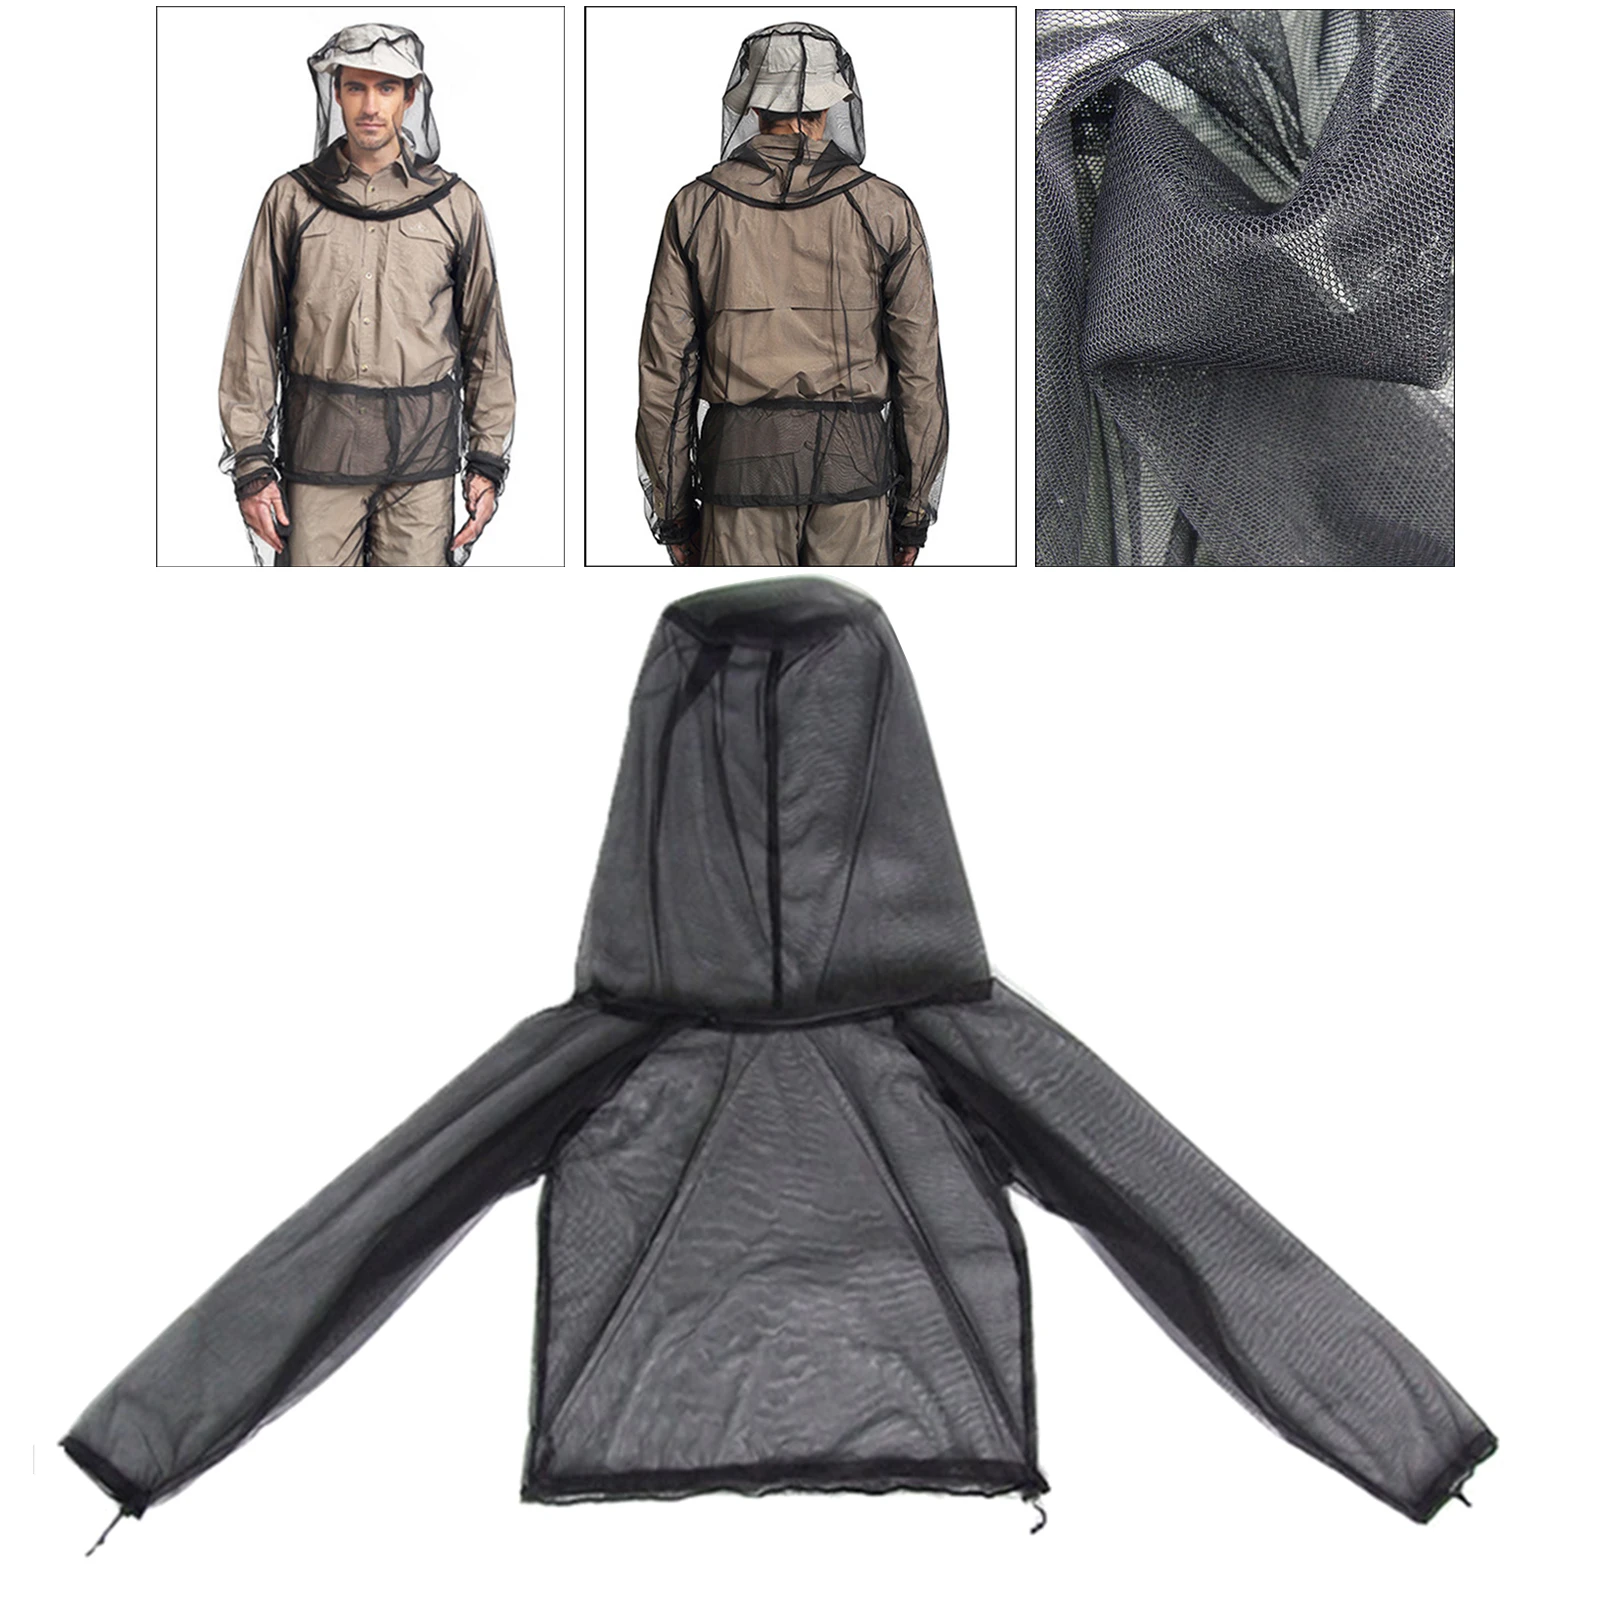 Unisex Fishing Clothes Mesh Hood Mosquito Repellent Suit Anti Mosquito Clothes Insect-proof Jacket Set for Outdoor Protection 